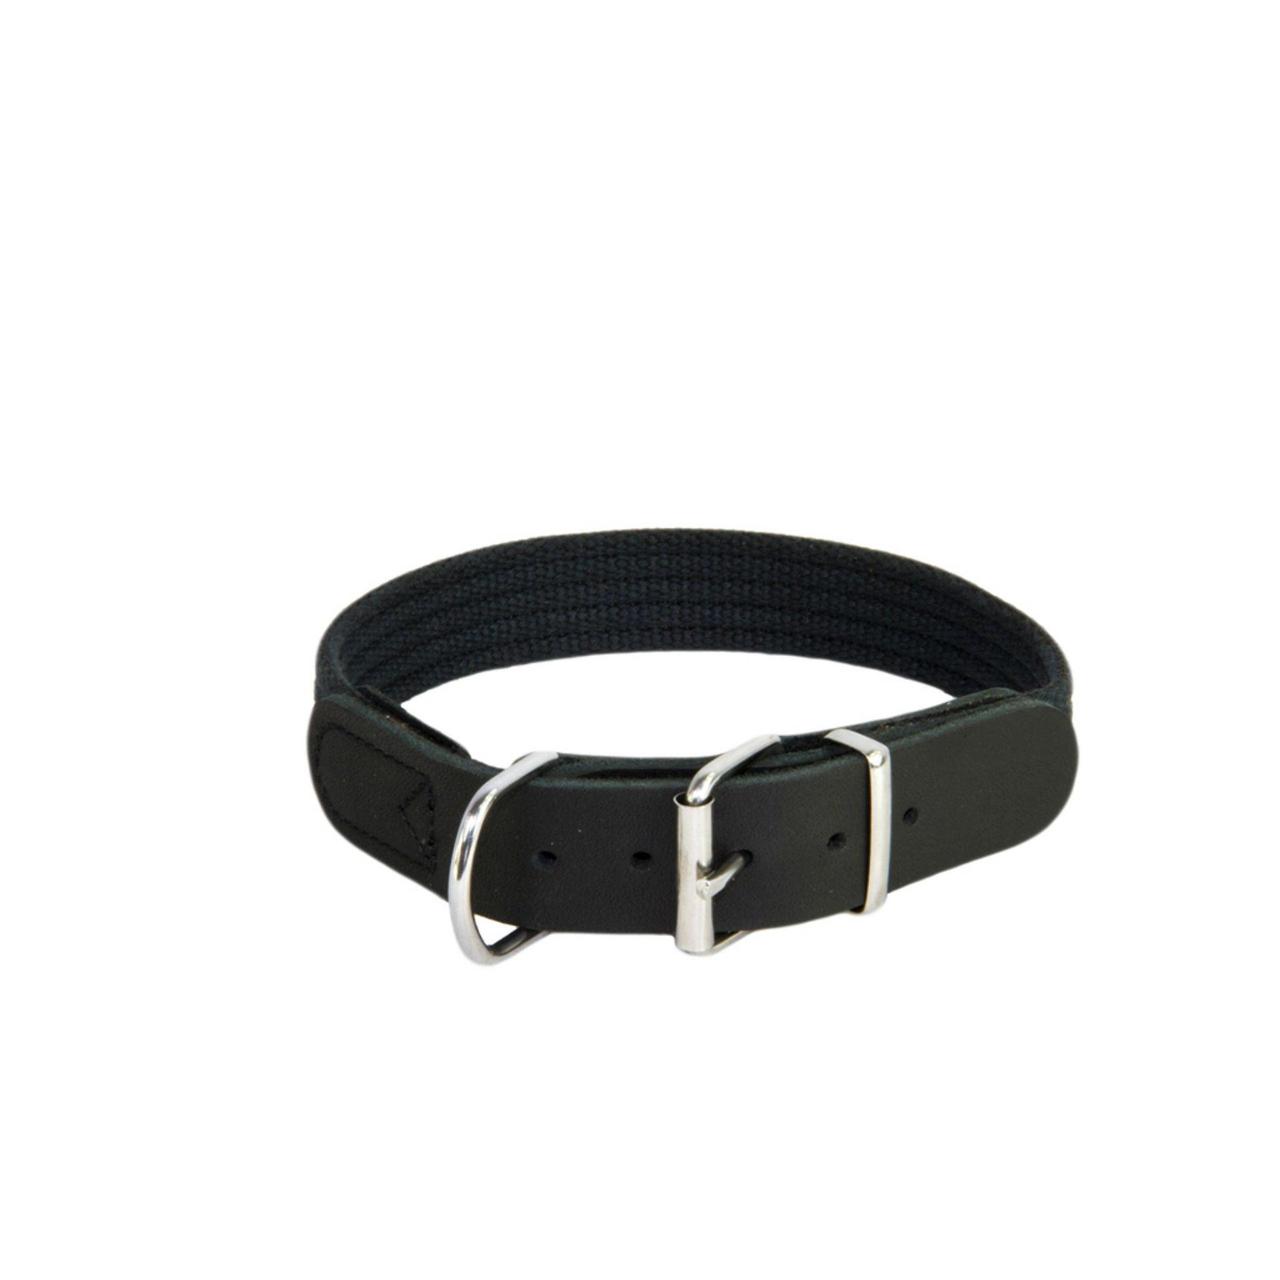 An image of Earthbound Cotton Black Collar 36 - 42cm